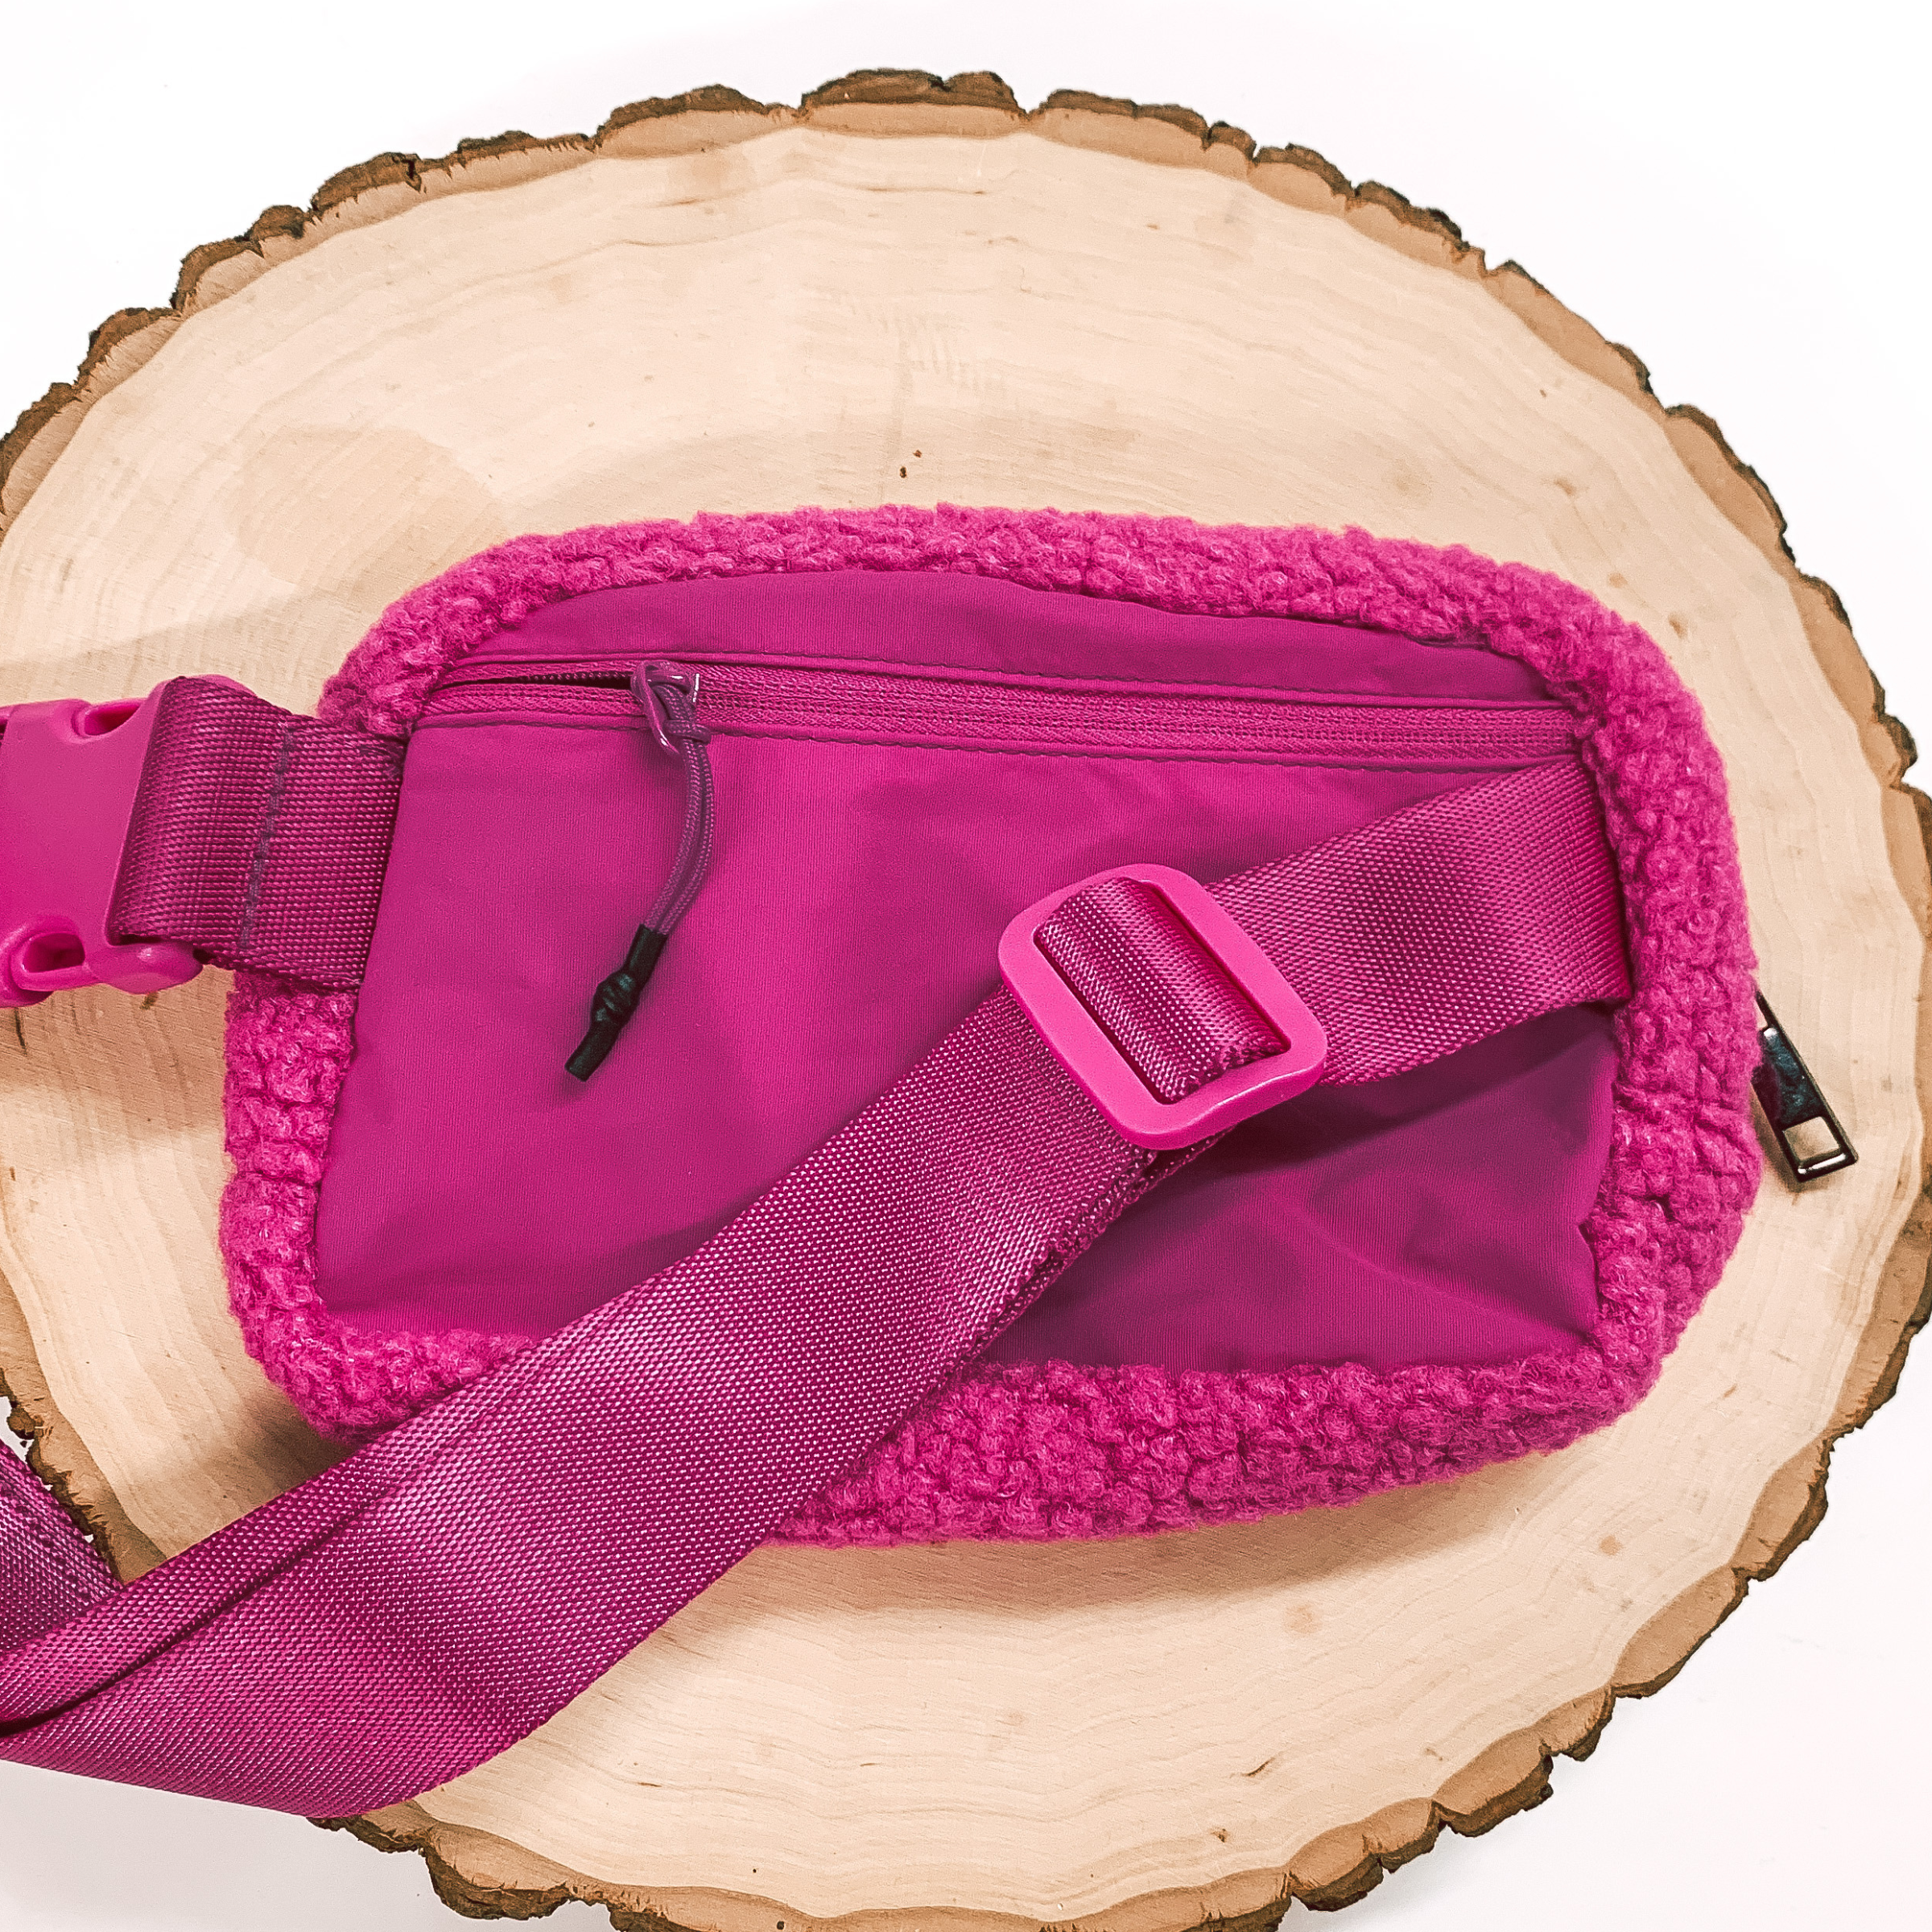 Headed to Aspen Sherpa Fanny Pack in Fuchsia - Giddy Up Glamour Boutique